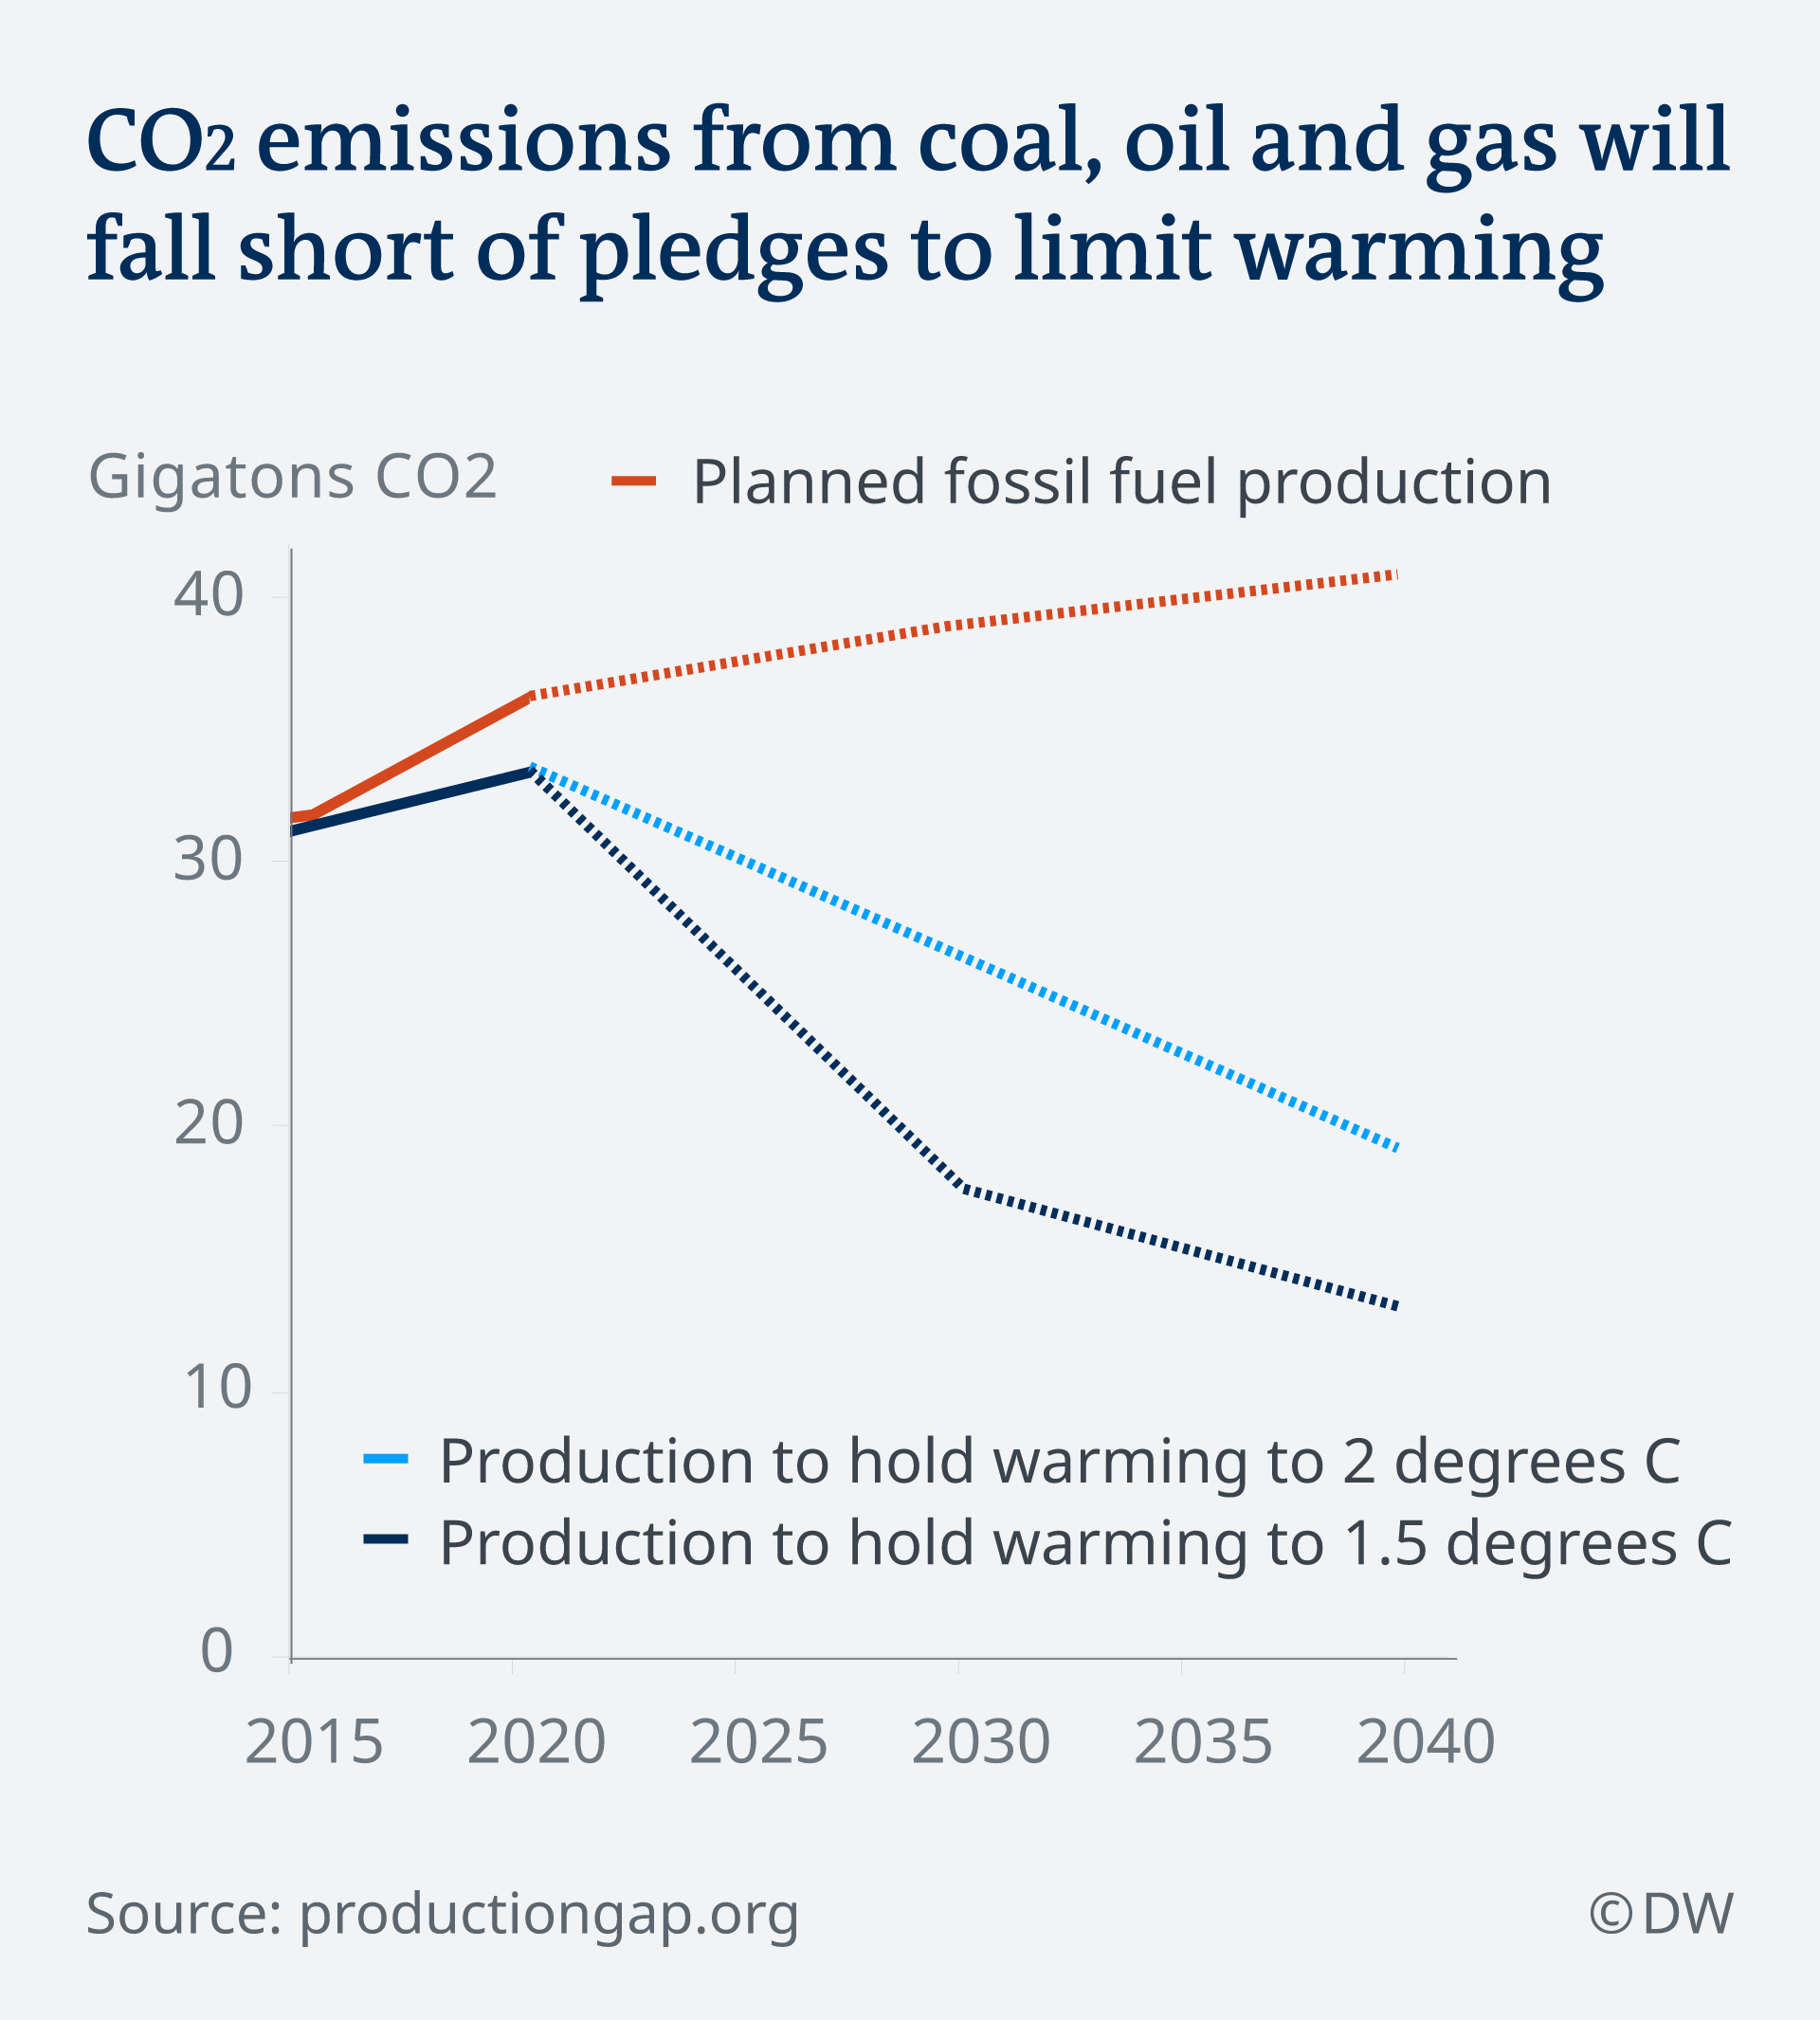 reductions in fossil fuel use to
          limit warming